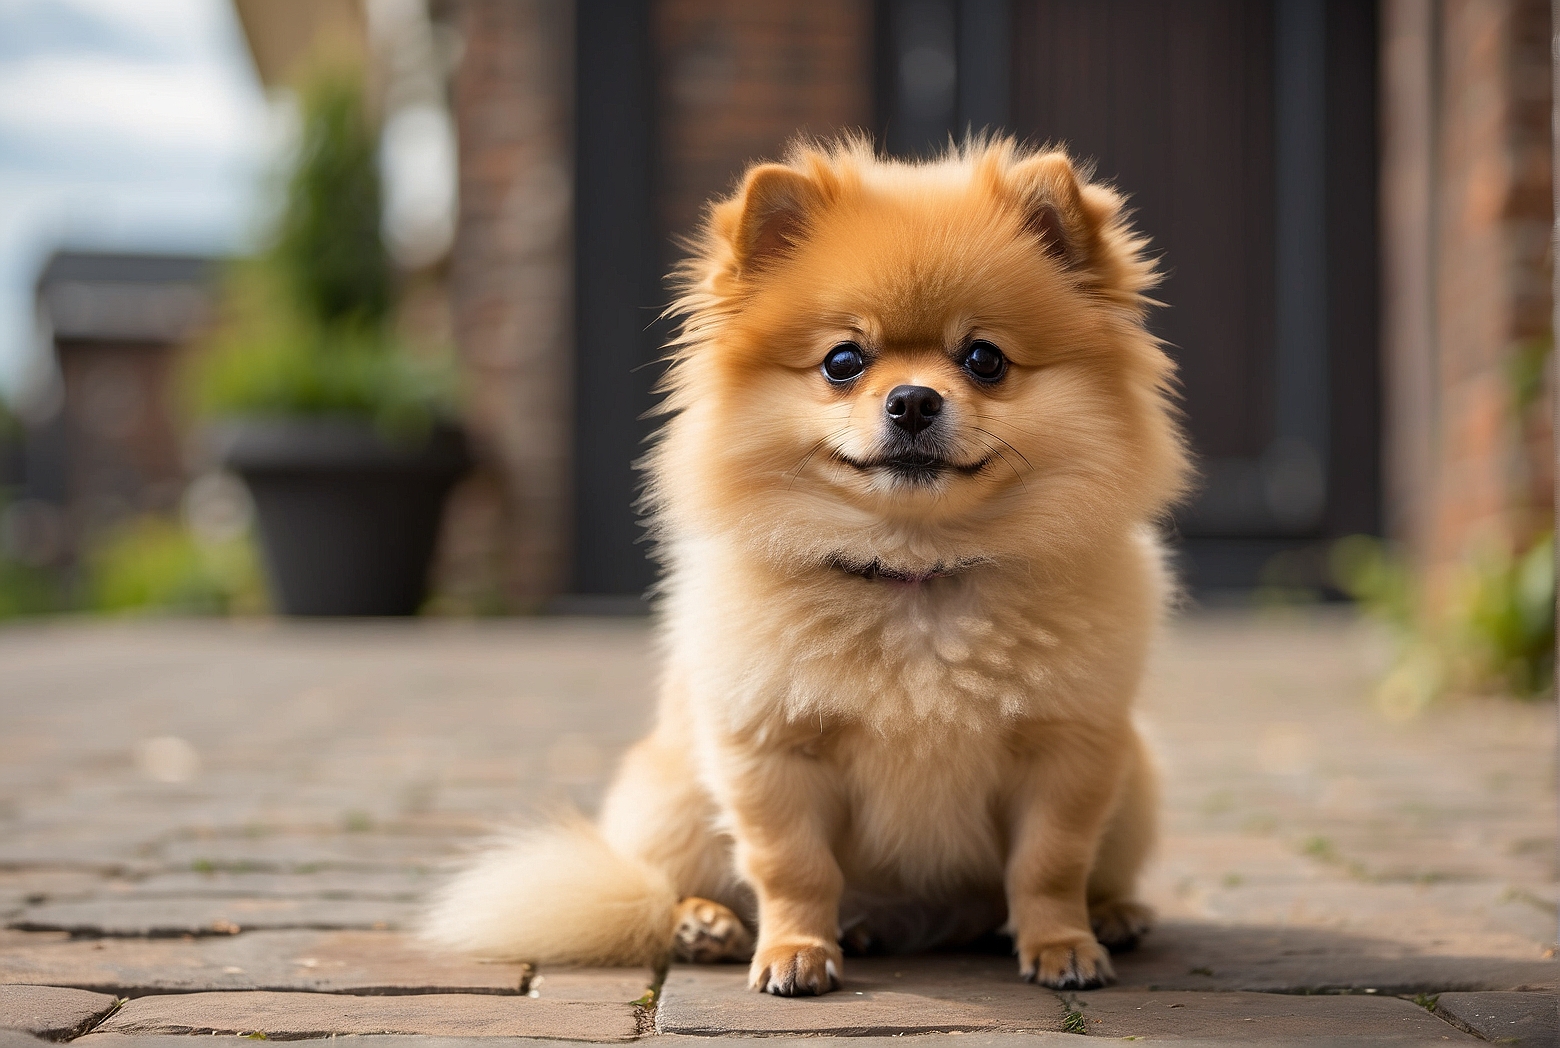 Can a Pomeranian be Trained to be a Guard Dog?